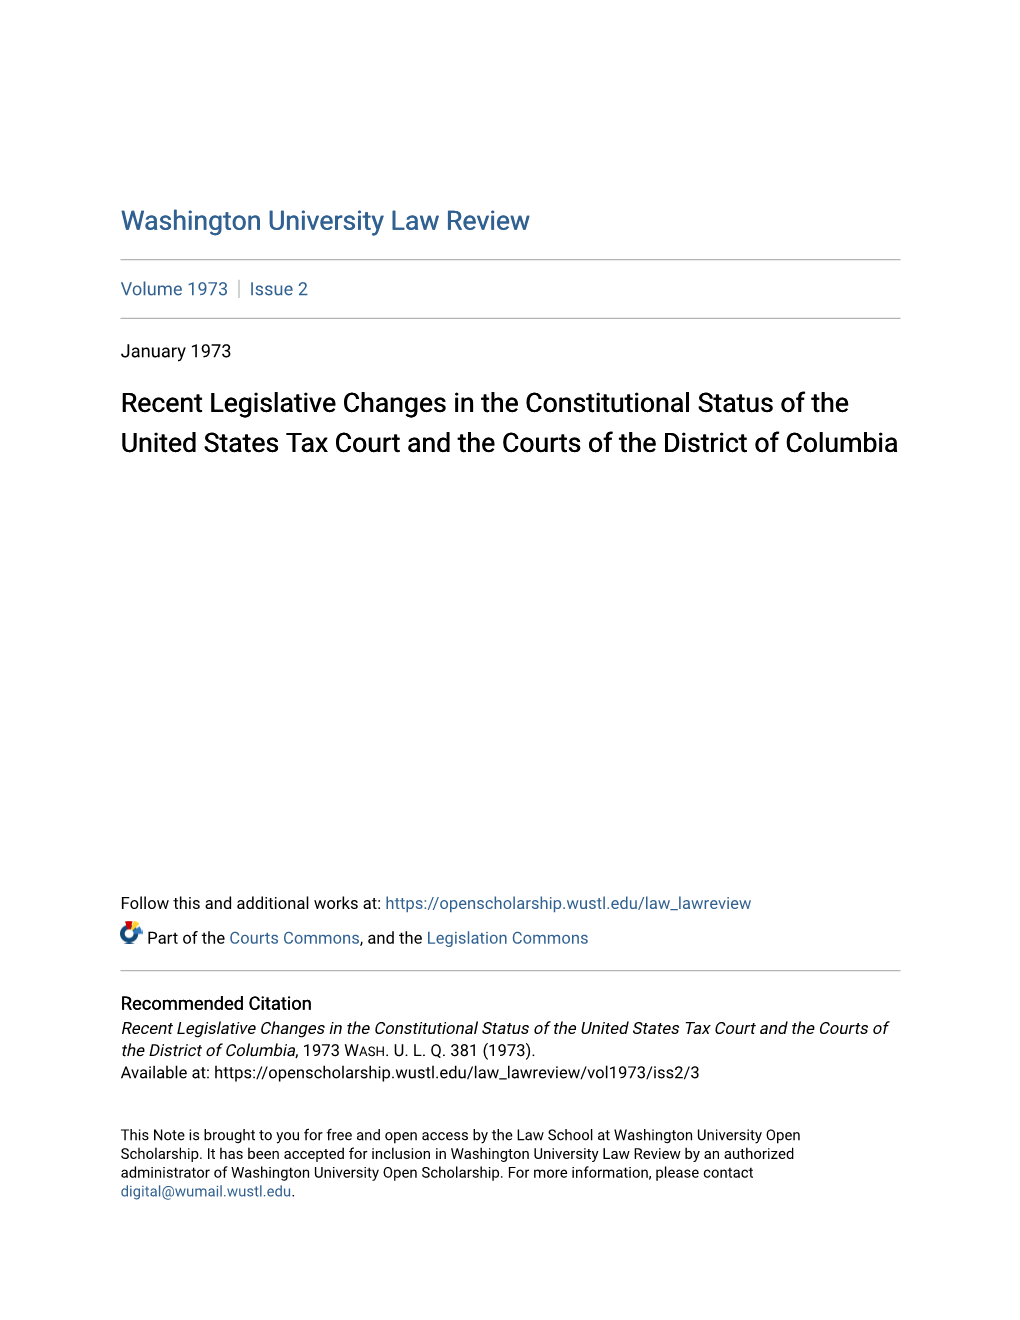 Recent Legislative Changes in the Constitutional Status of the United States Tax Court and the Courts of the District of Columbia